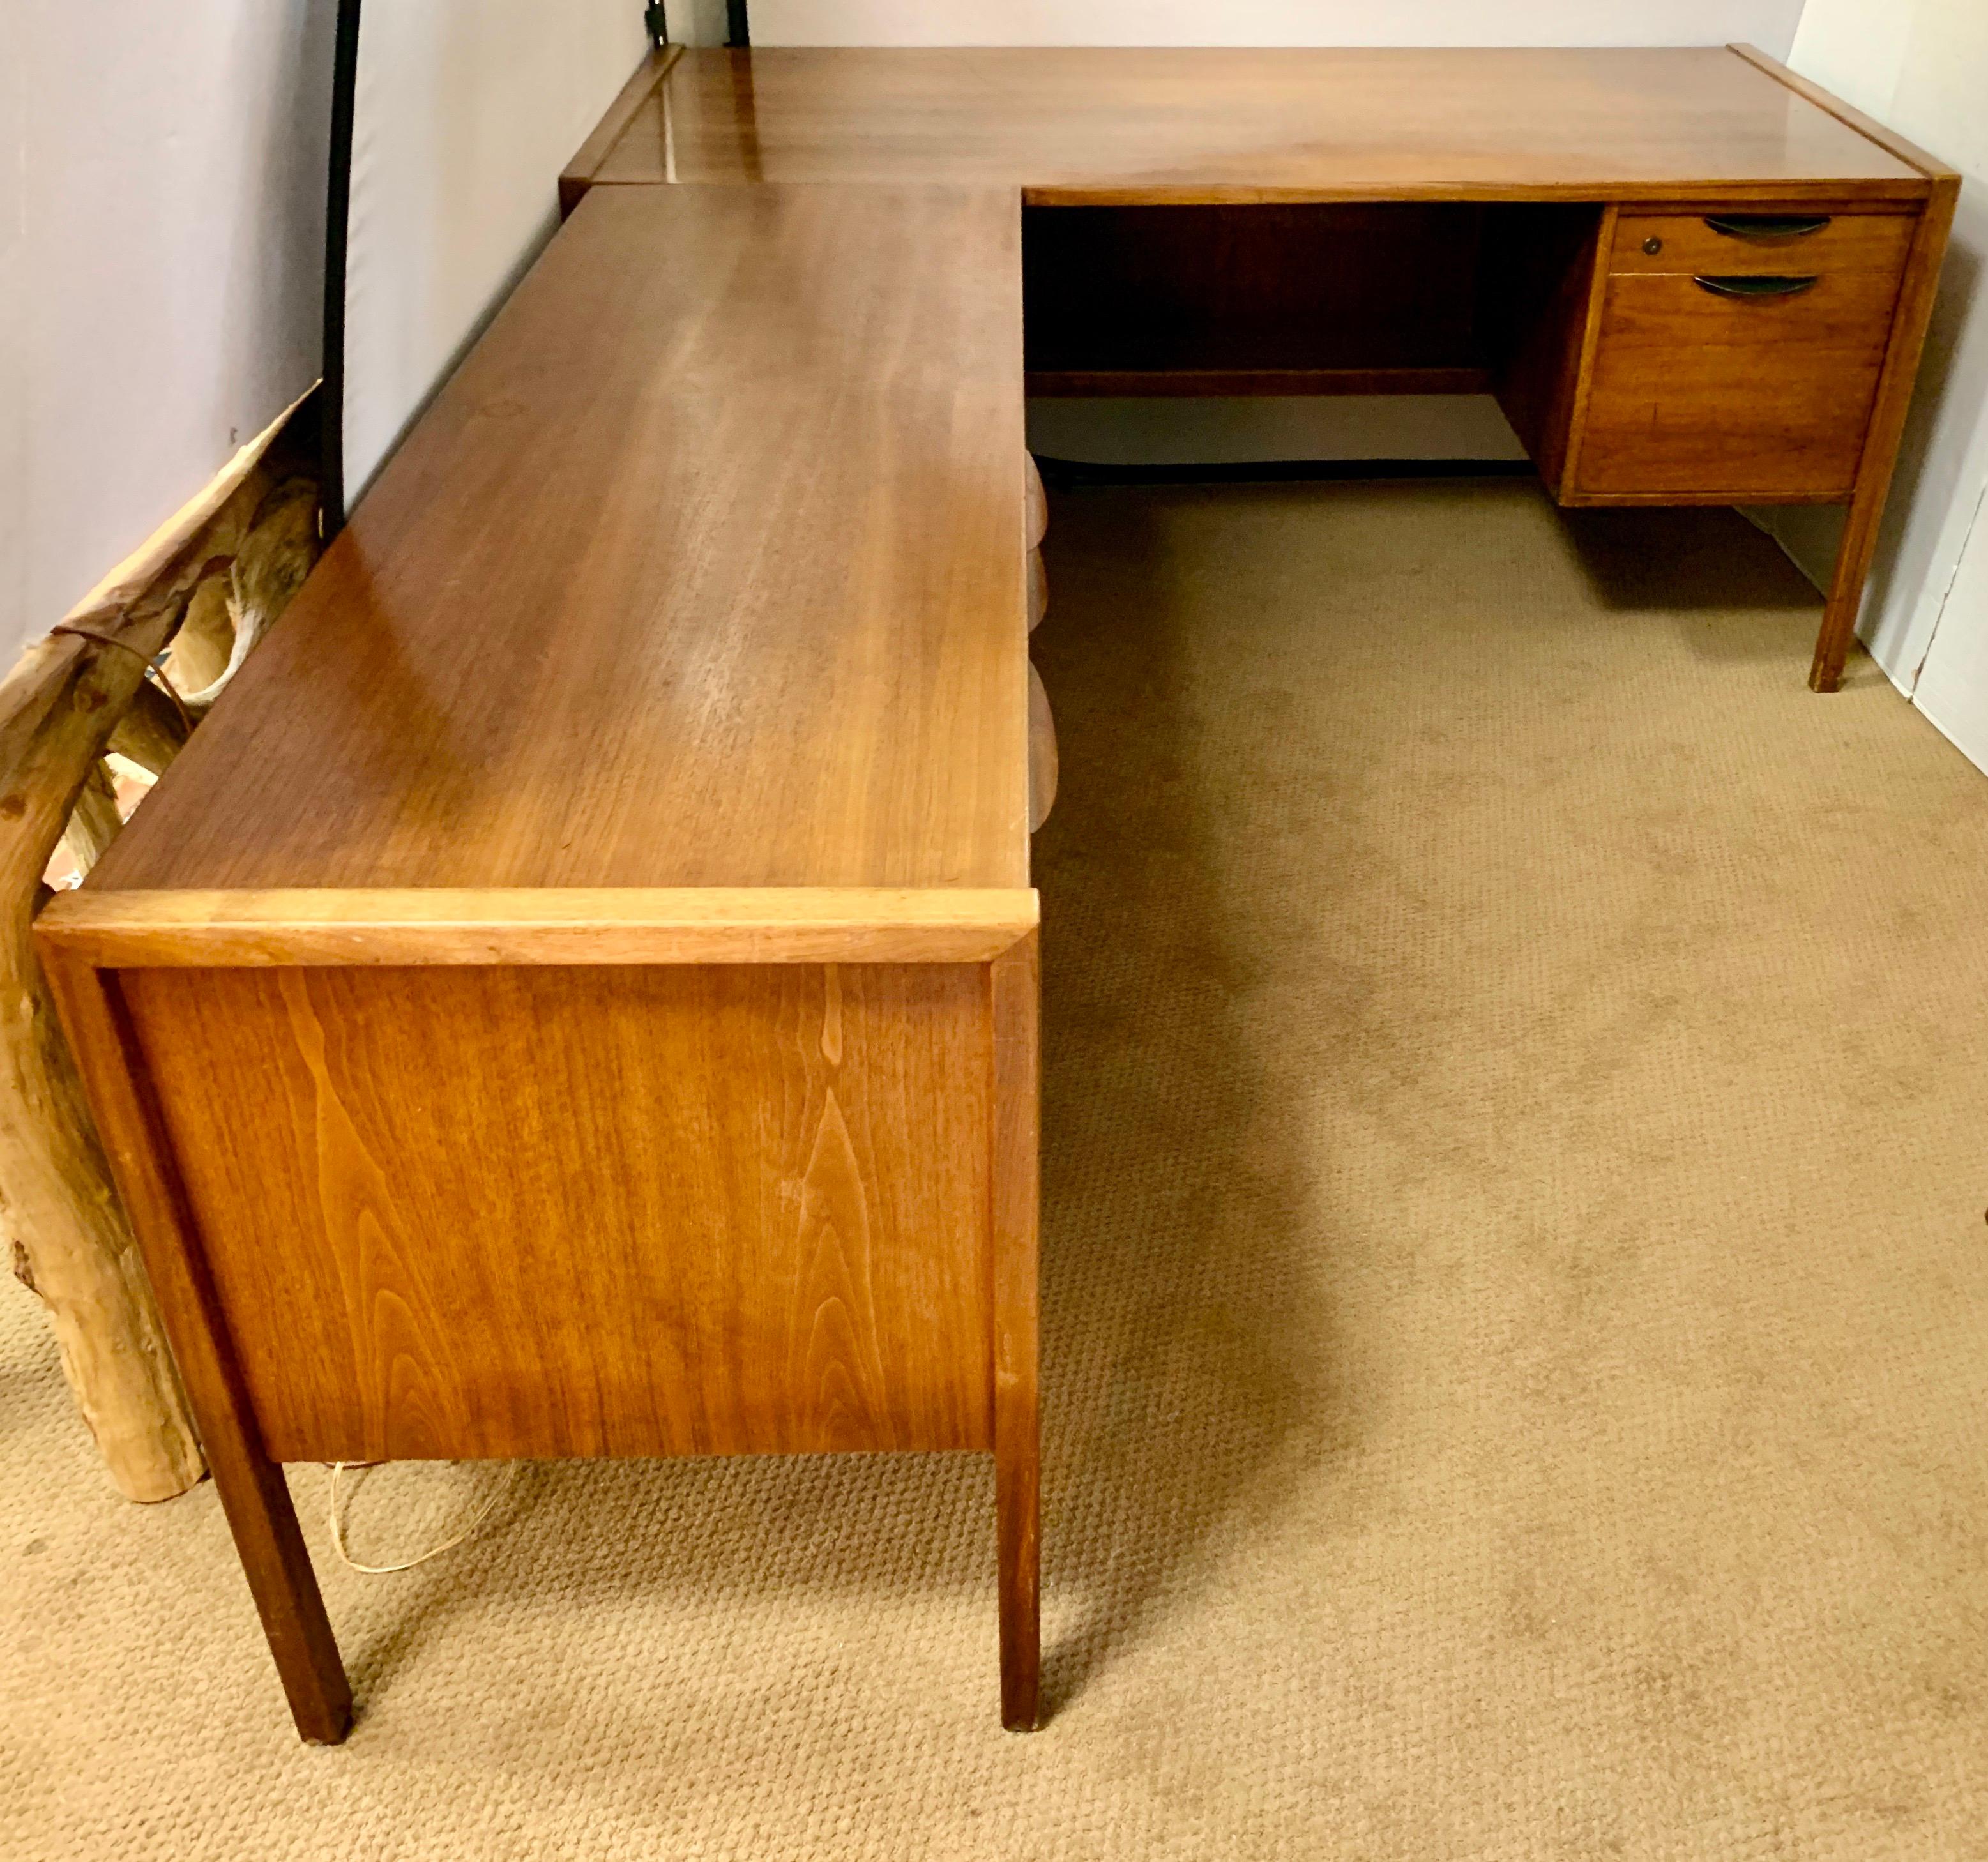 An exceptional Mid-Century Modern two piece walnut executive desk designed by Jens Risom. The desk features gorgeous walnut wood grain and sleek Minimalist design. It offers exceptional storage with multiple drawers. The original Jens Risom label is